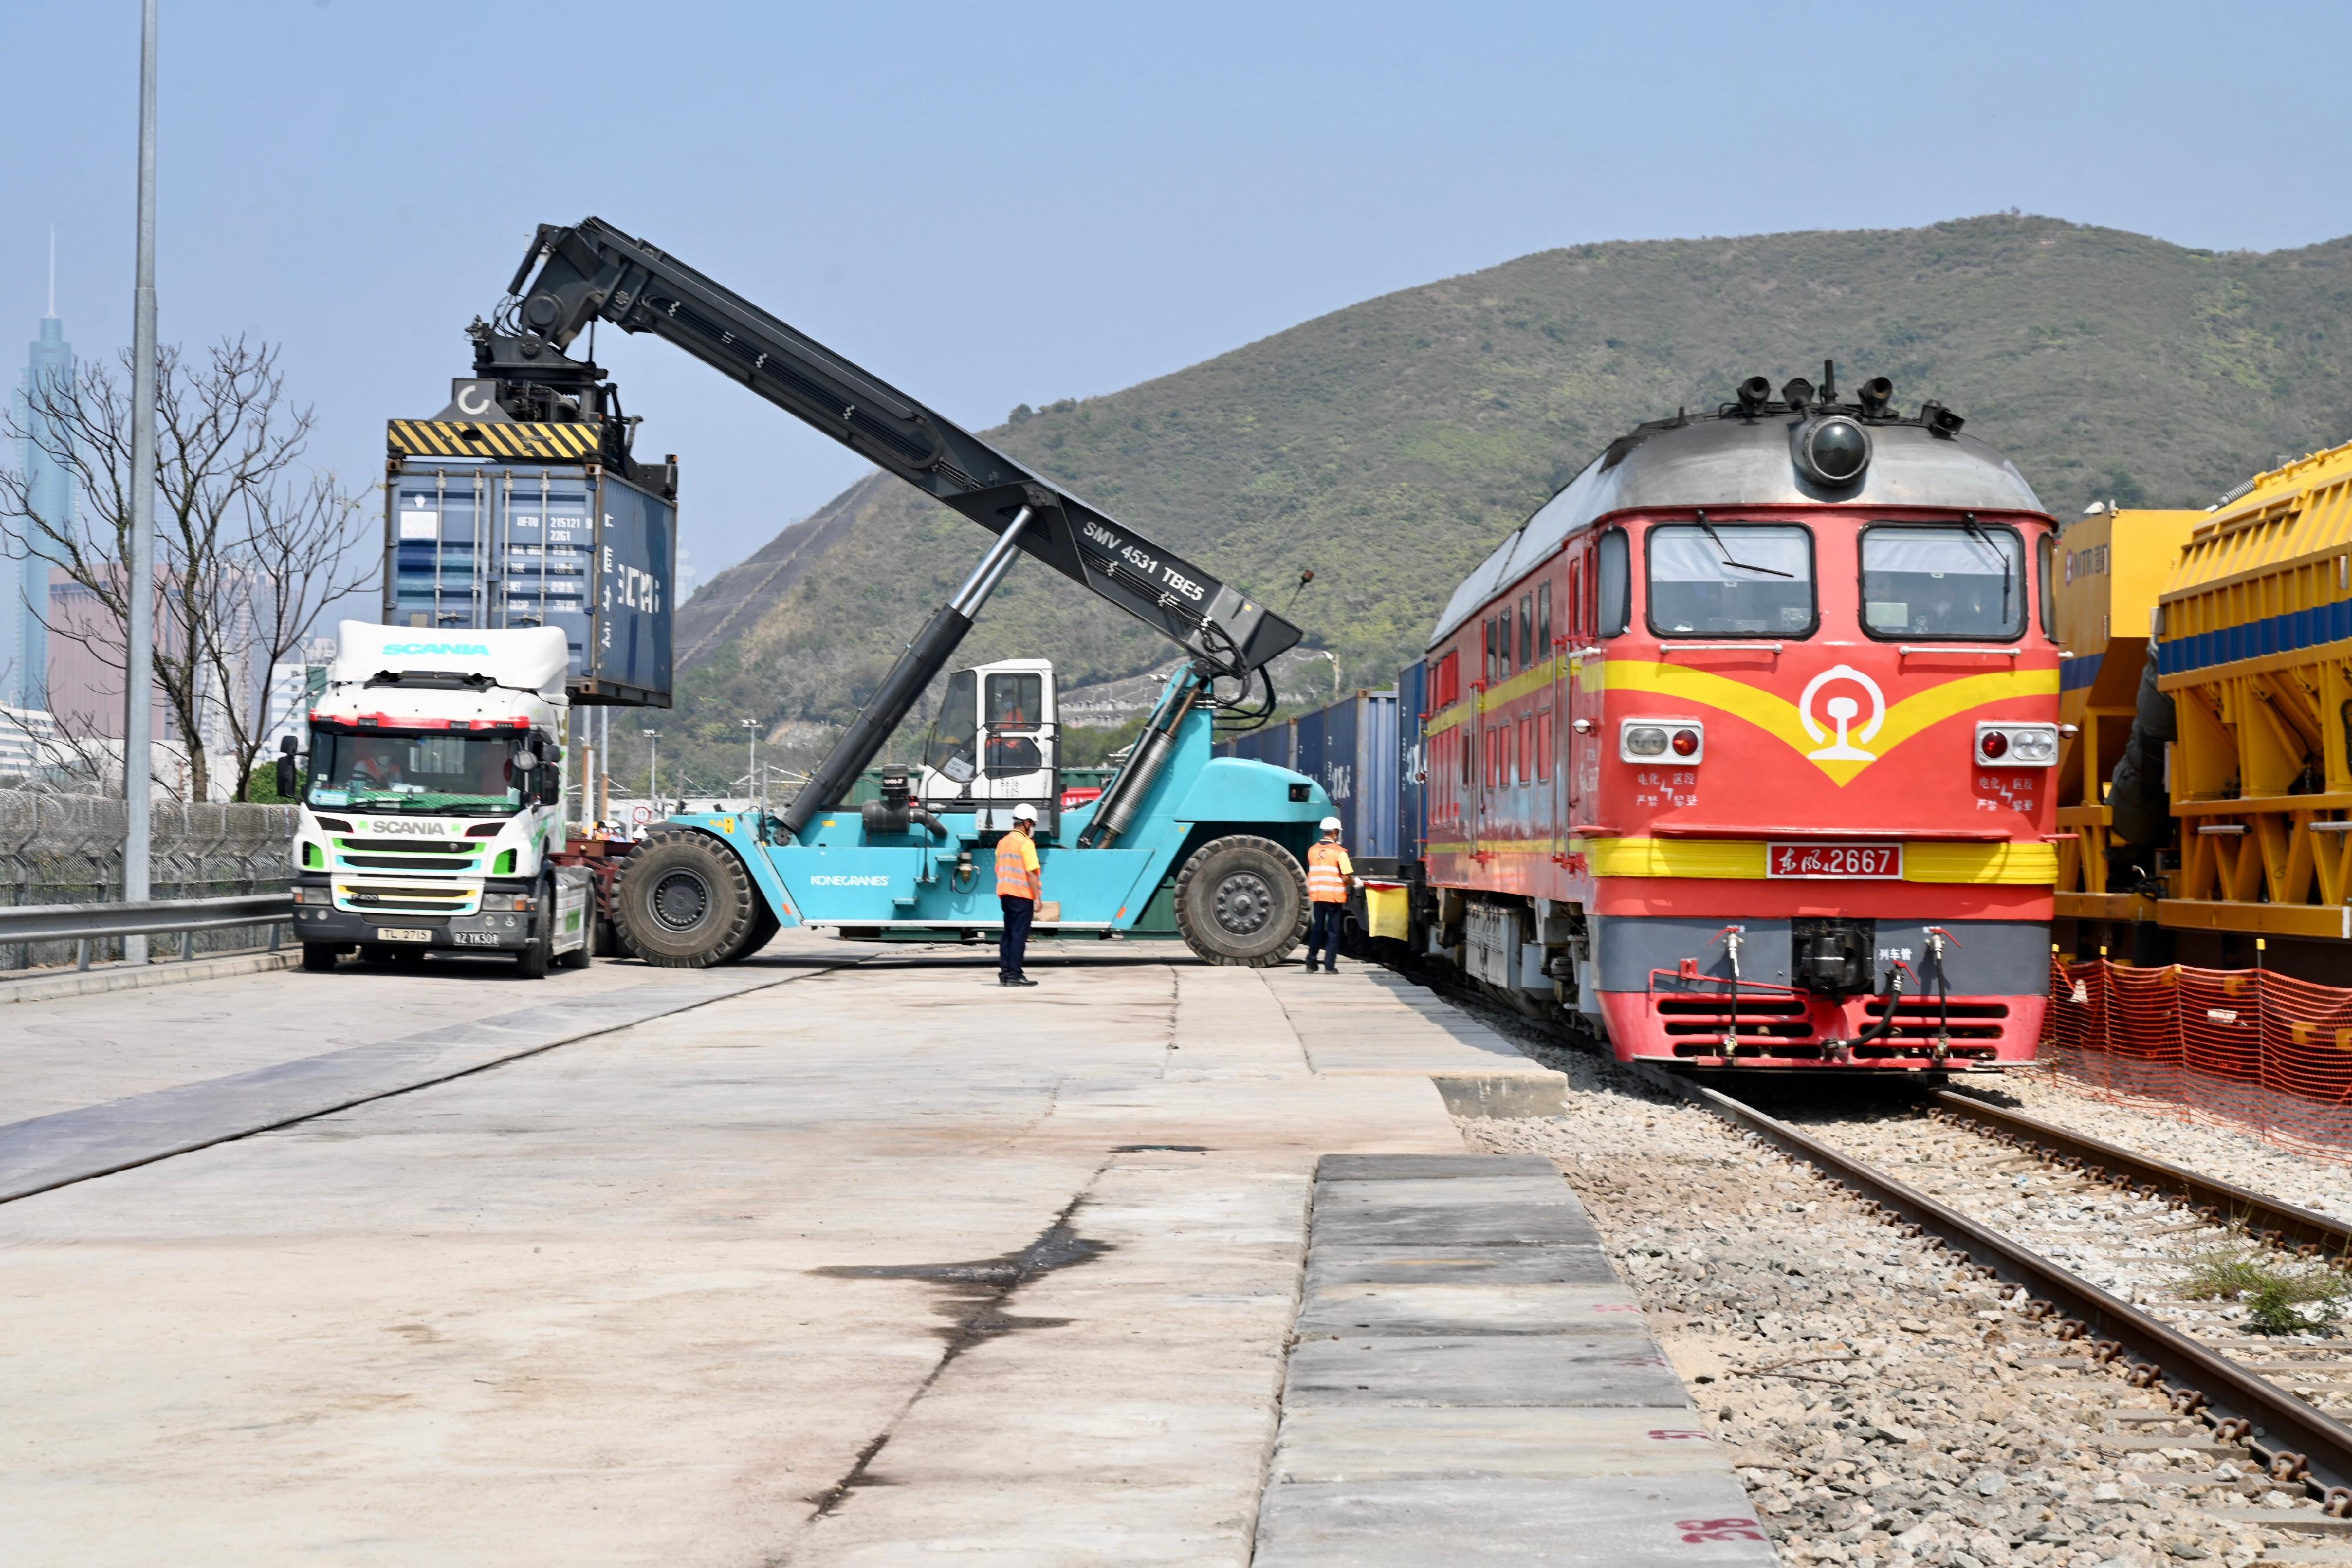 The railway transportation of goods from the Mainland to Hong Kong commenced today (March 2) with the first train carrying anti-epidemic supplies arriving at Hong Kong this morning. Photo shows a crane loading a container onto a goods vehicle.